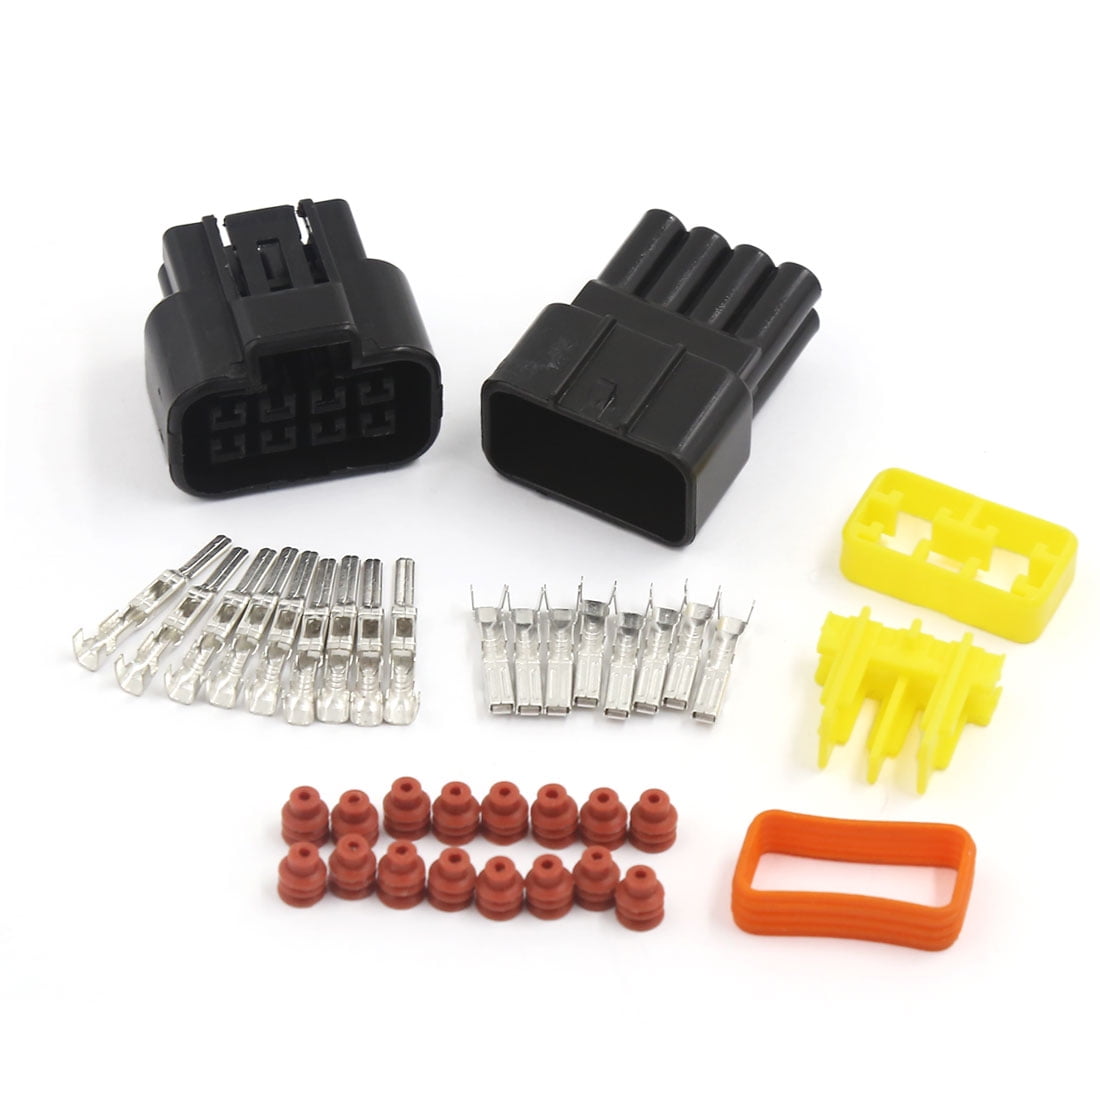 1 Pin/2 Pin/3 Pin/4 Pin/5 Pin/6 Pin for Car Truck Boat with Silicon Rubber Cable Seal QitinDasen 30 Set Professional Car Auto Waterproof Electrical Wire Connector Terminal Plug Socket Kit 